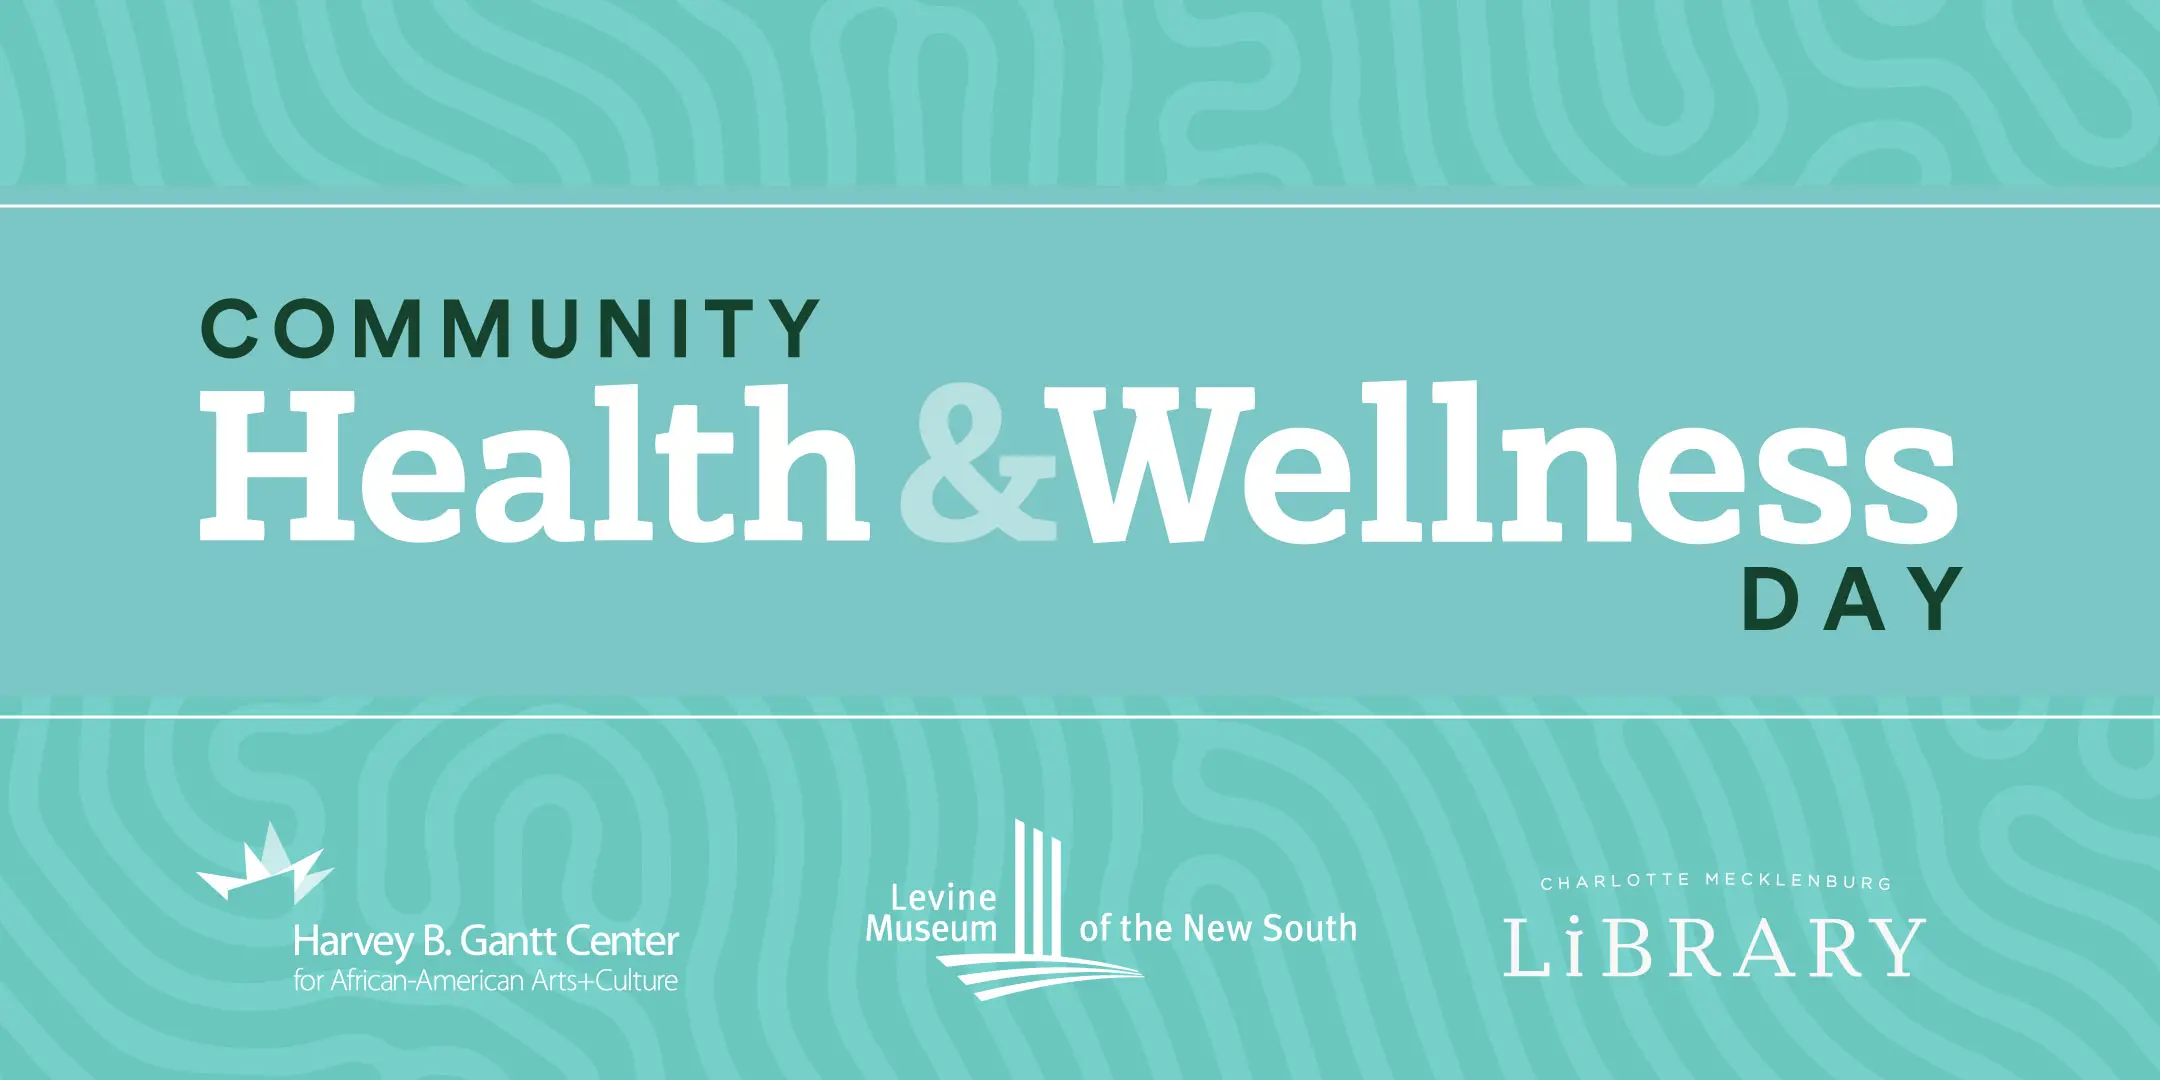 Levine Museum of the New South Community Health and Wellness Day Event Image